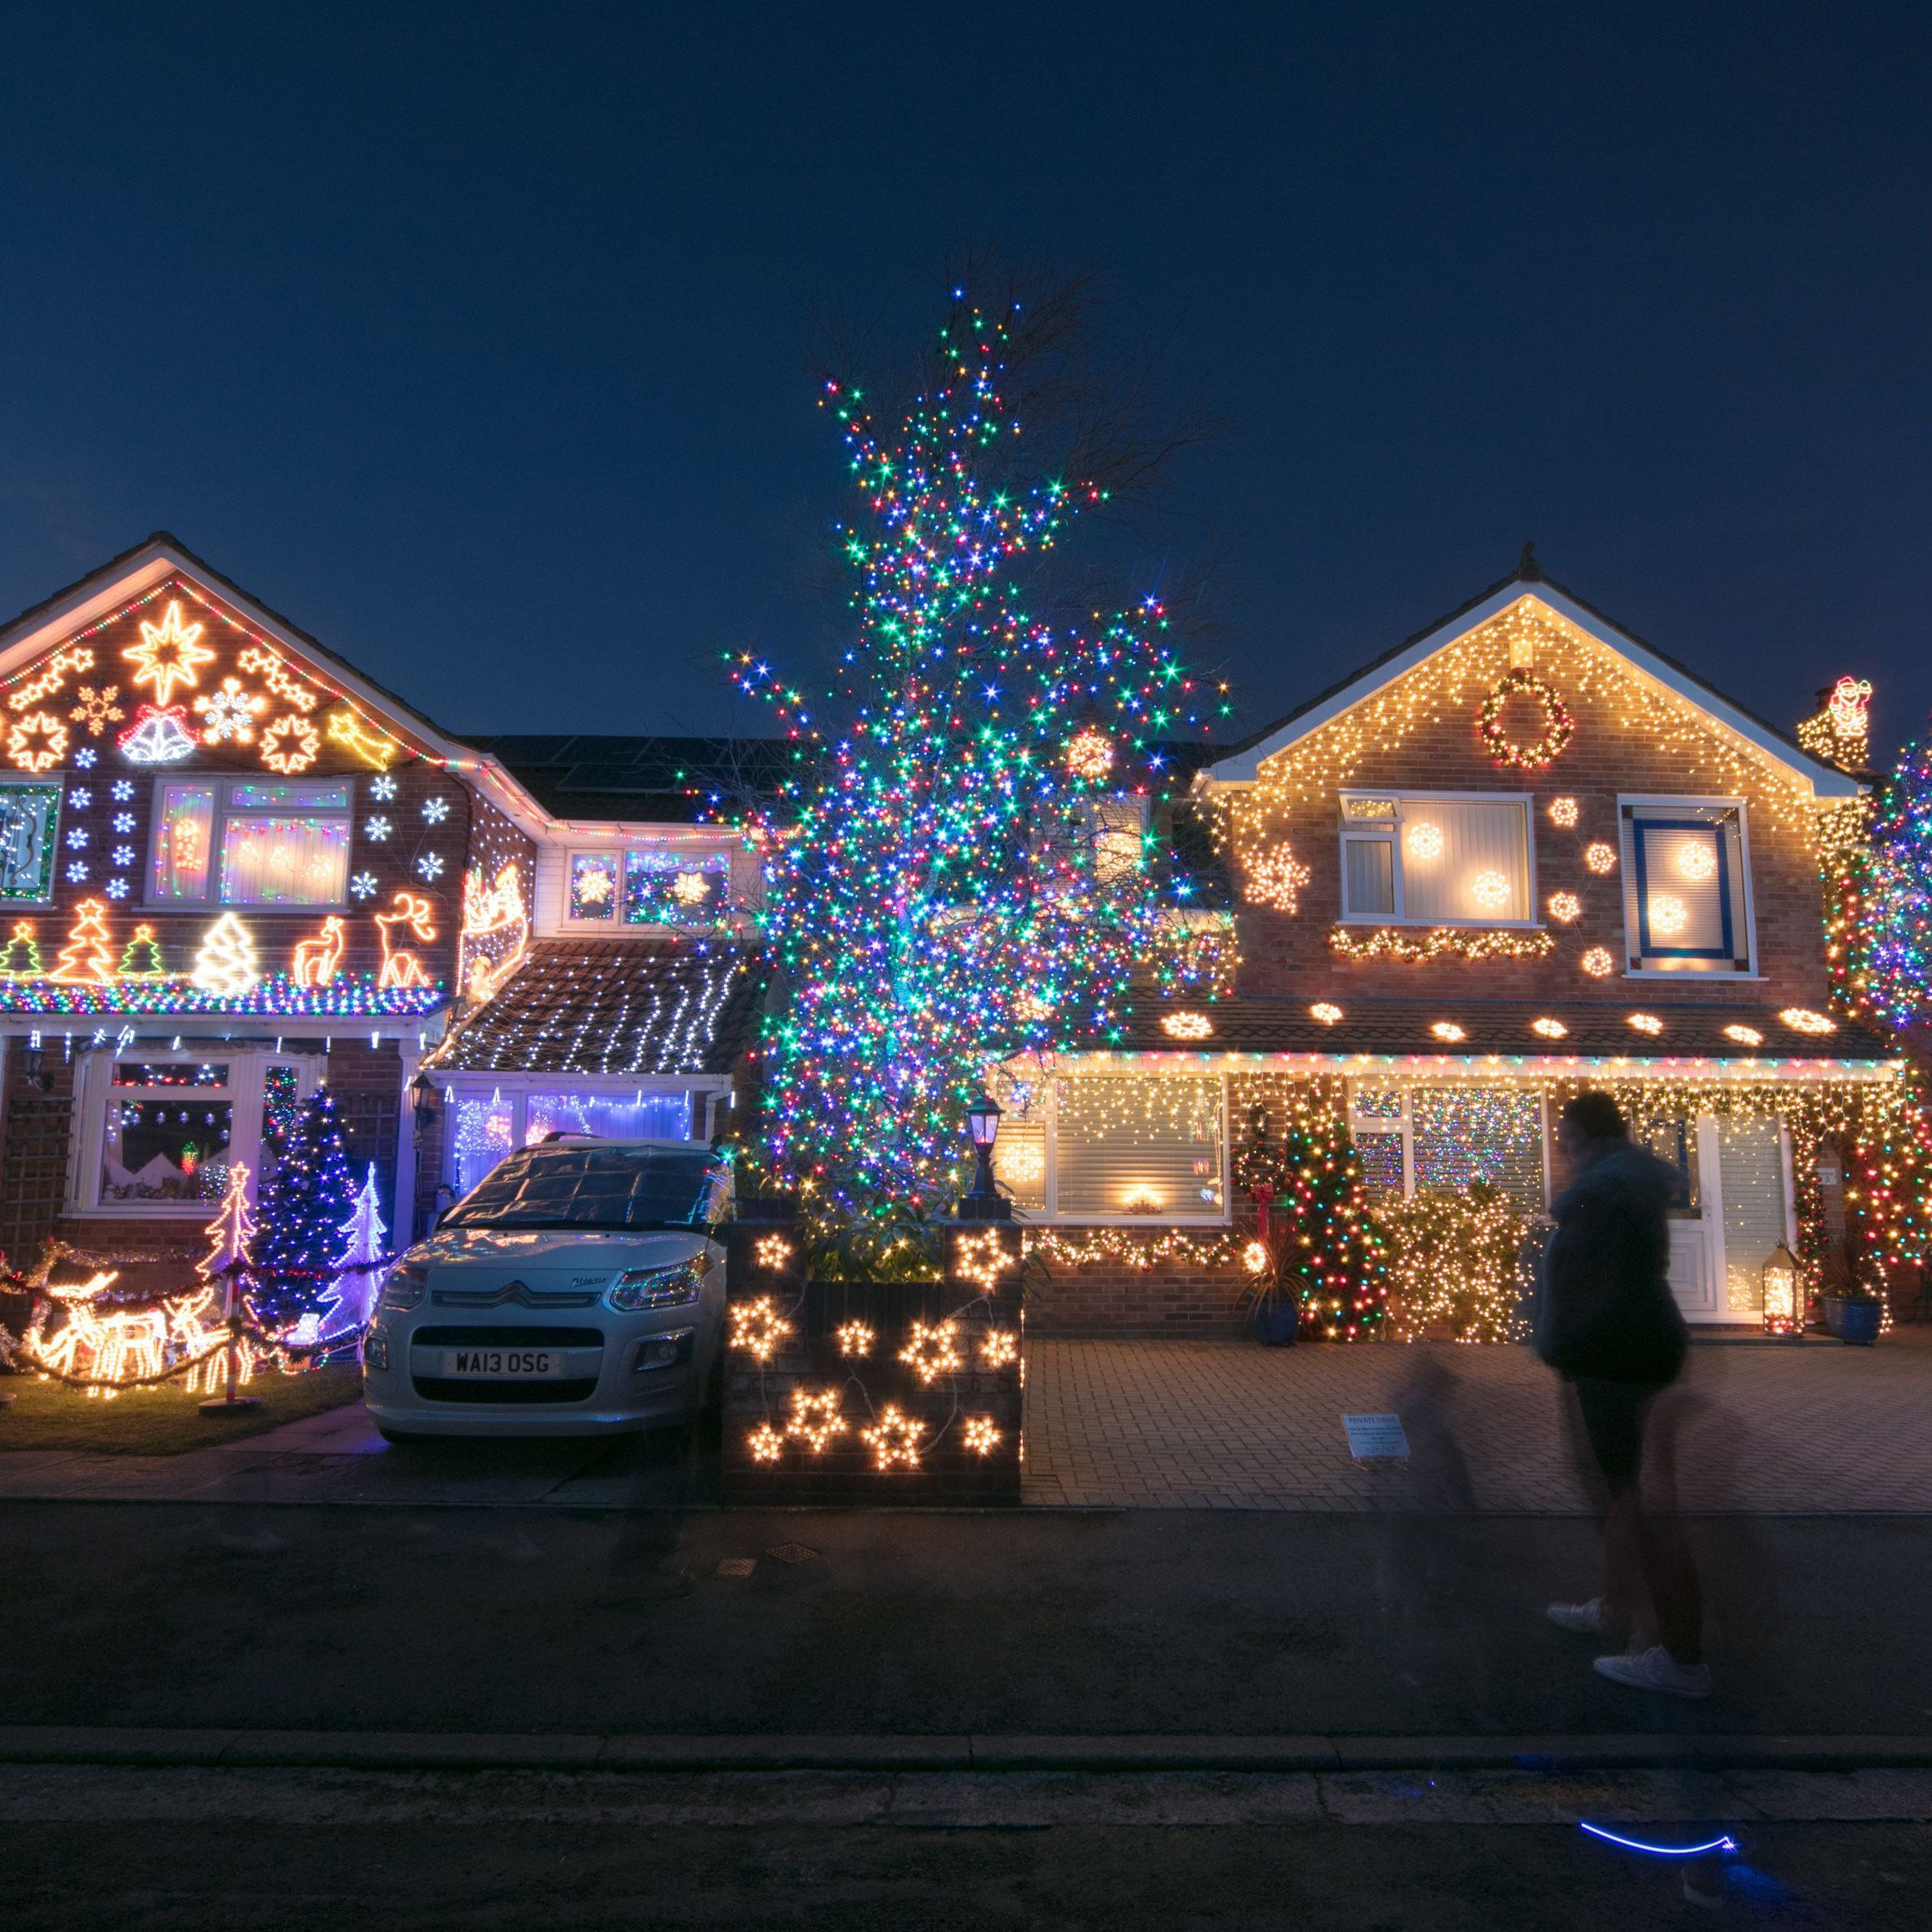 How to Set up Christmas Lights Synchronized to Music